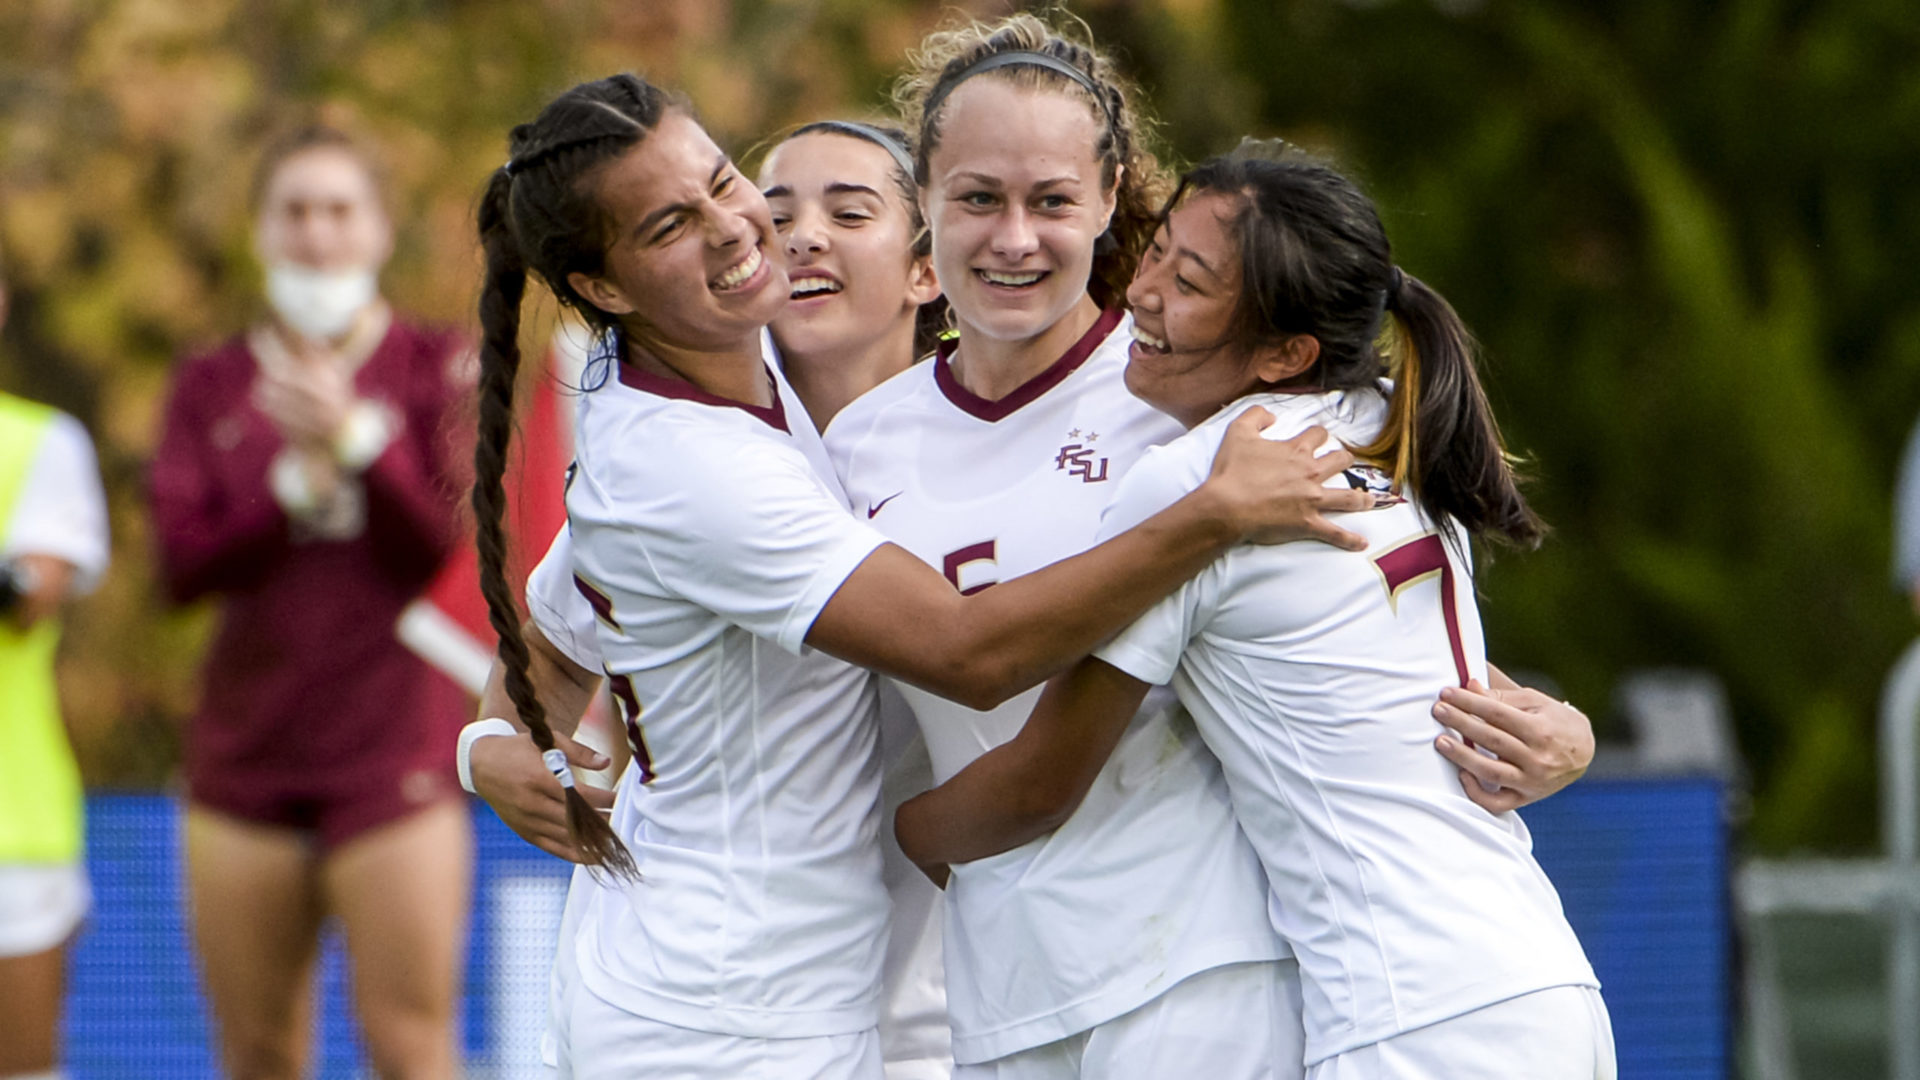 Florida St. earns No. 1 overall seed in NCAA Divison I Women's Soccer tournament